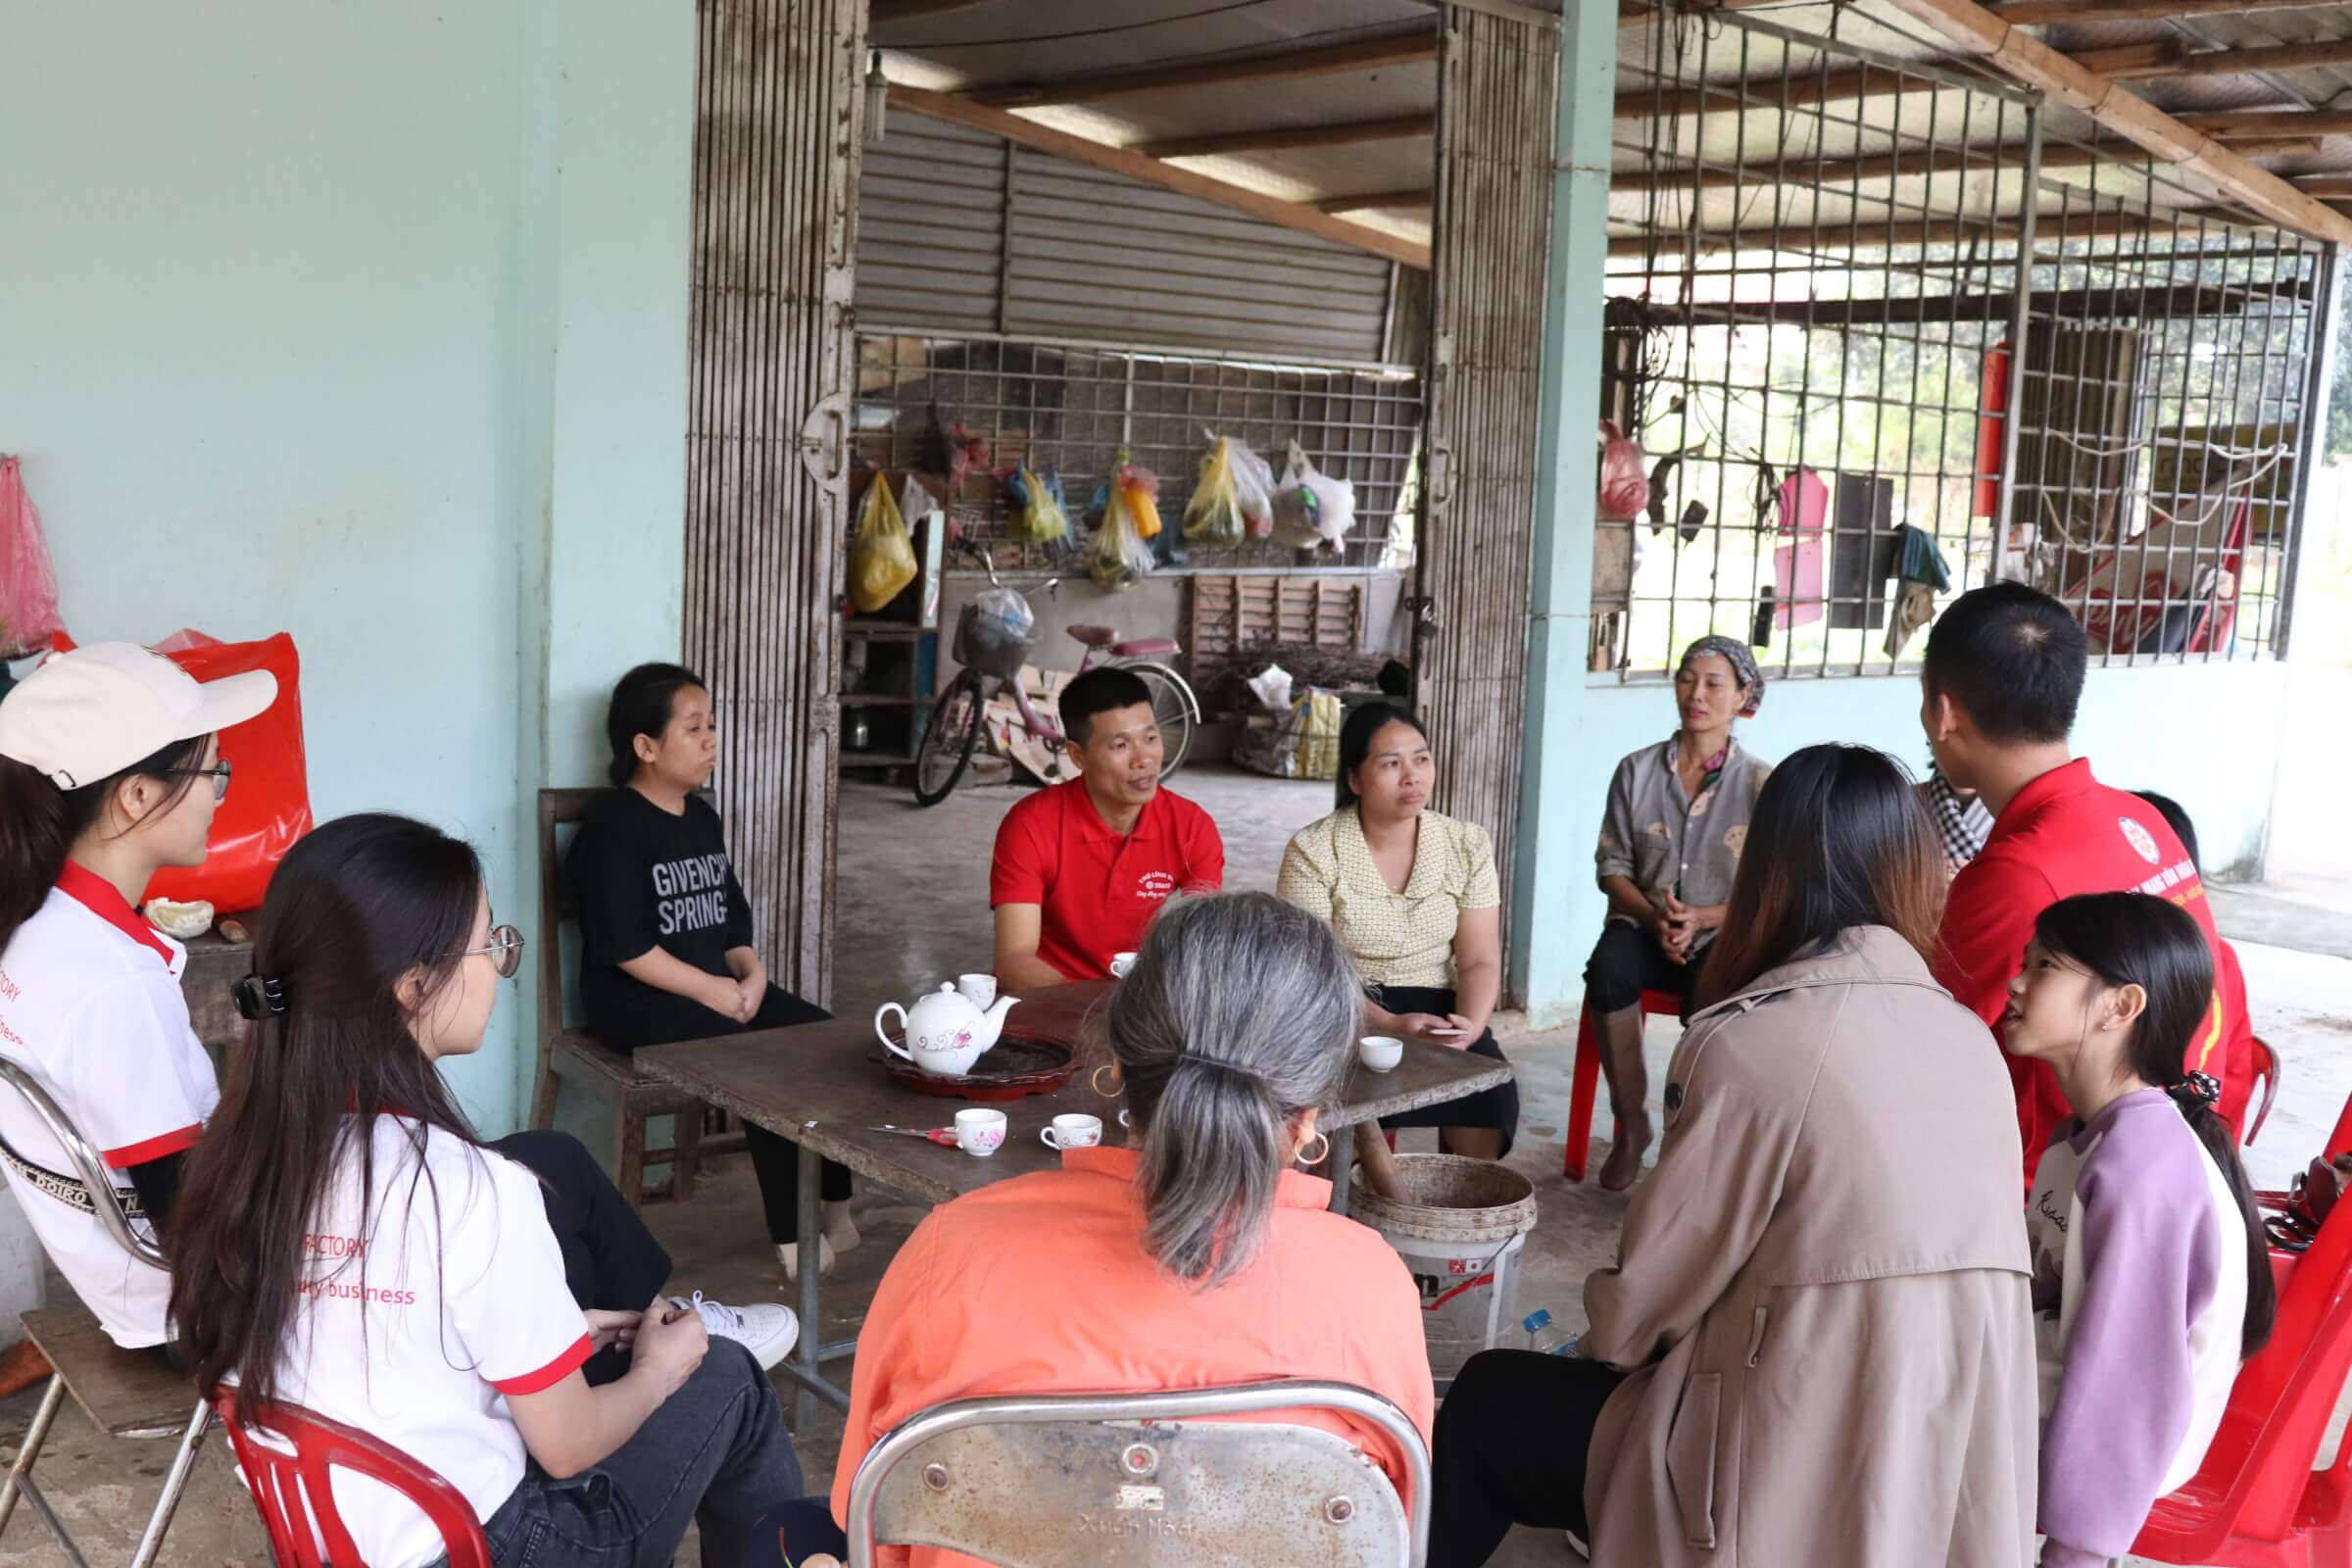 Vietnamlash had the chance to meet with many local households